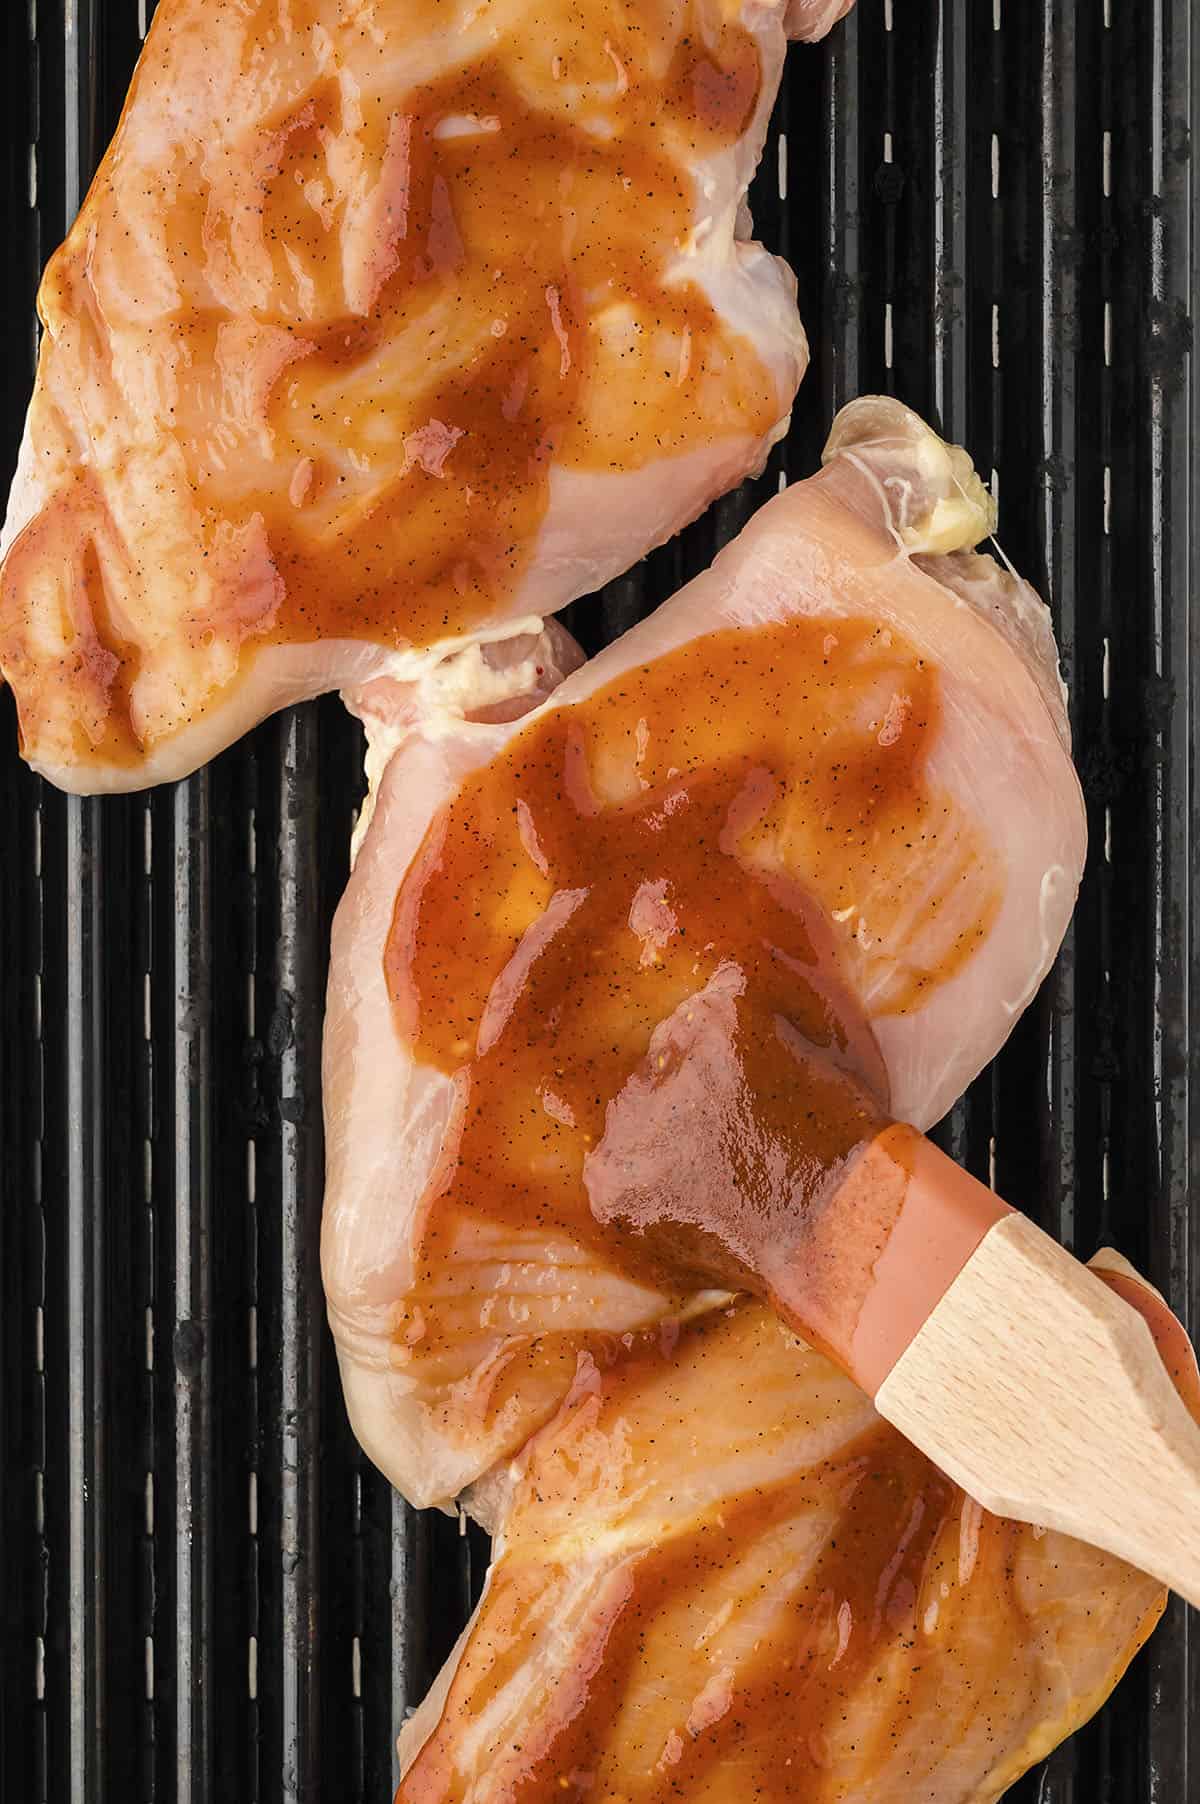 Barbecue sauce being brushed on chicken breasts on the grill.